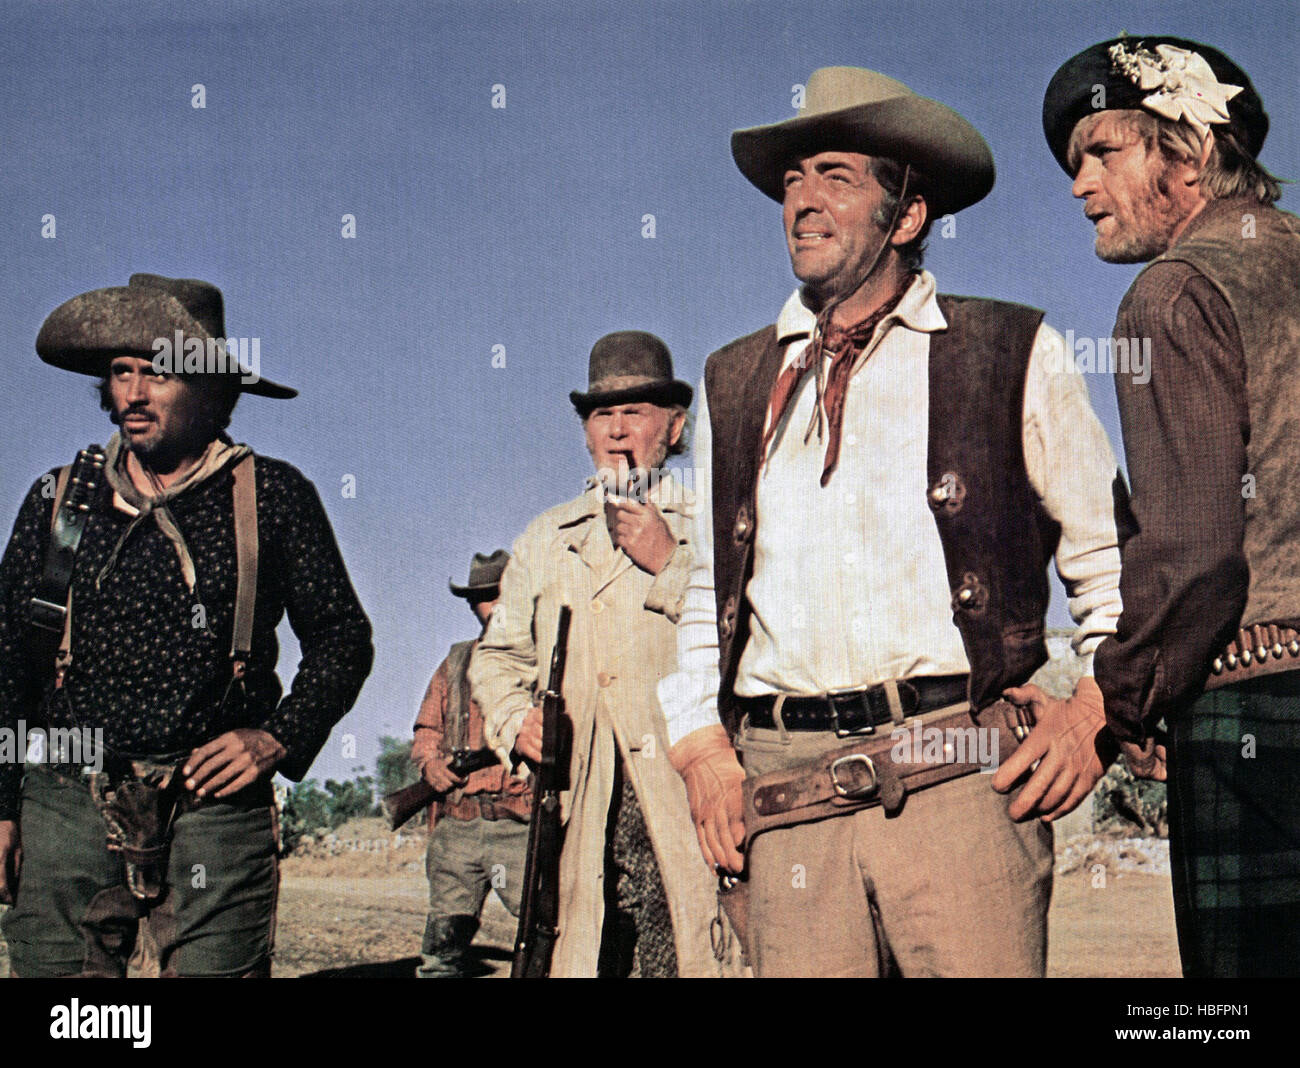 SOMETHING BIG, from left: Harry Carey Jr. (pipe), Dean Martin, Don Knight,  1971 Stock Photo - Alamy